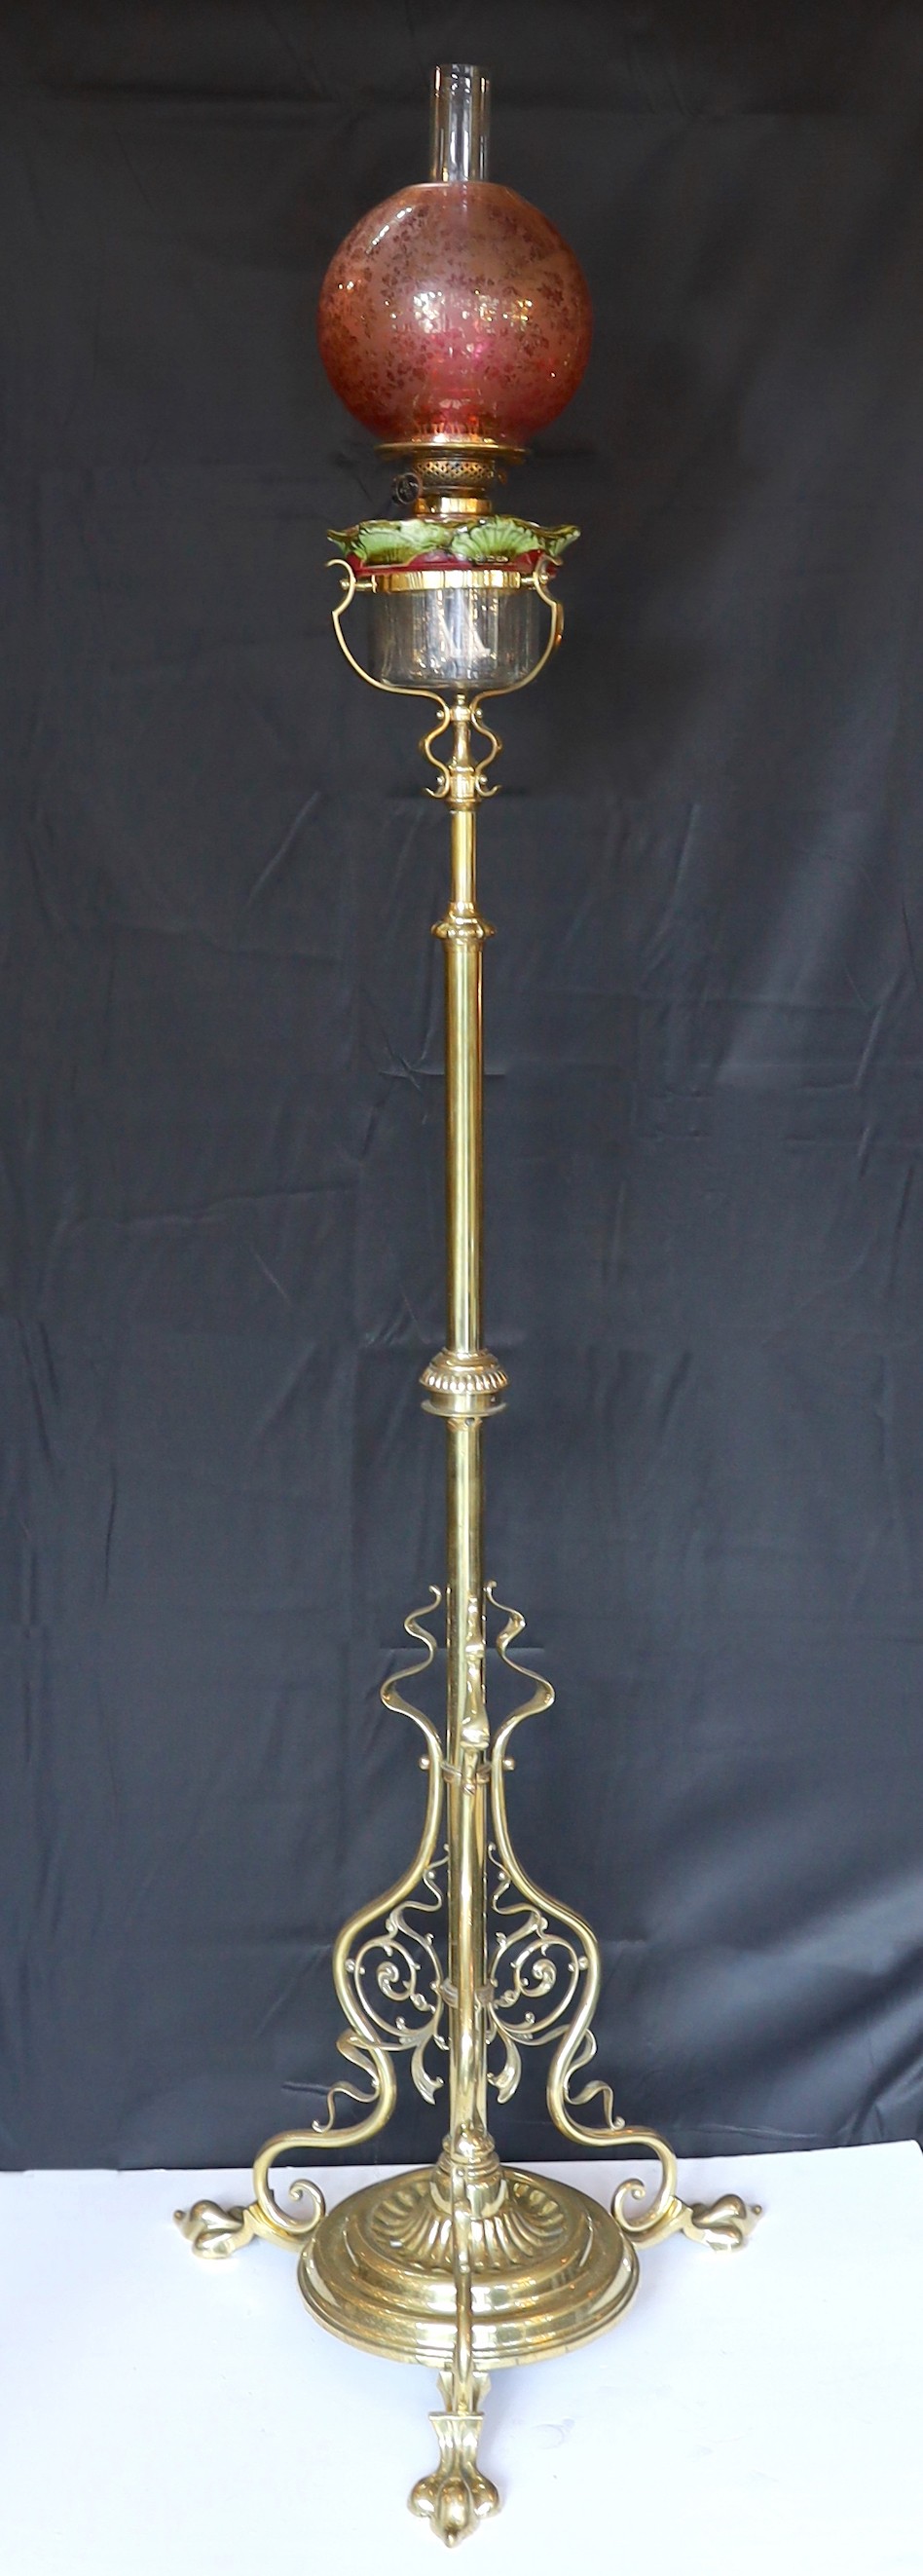 An Edwardian brass telescopic oil lamp standard, with later edged cranberry glass shade and duplex